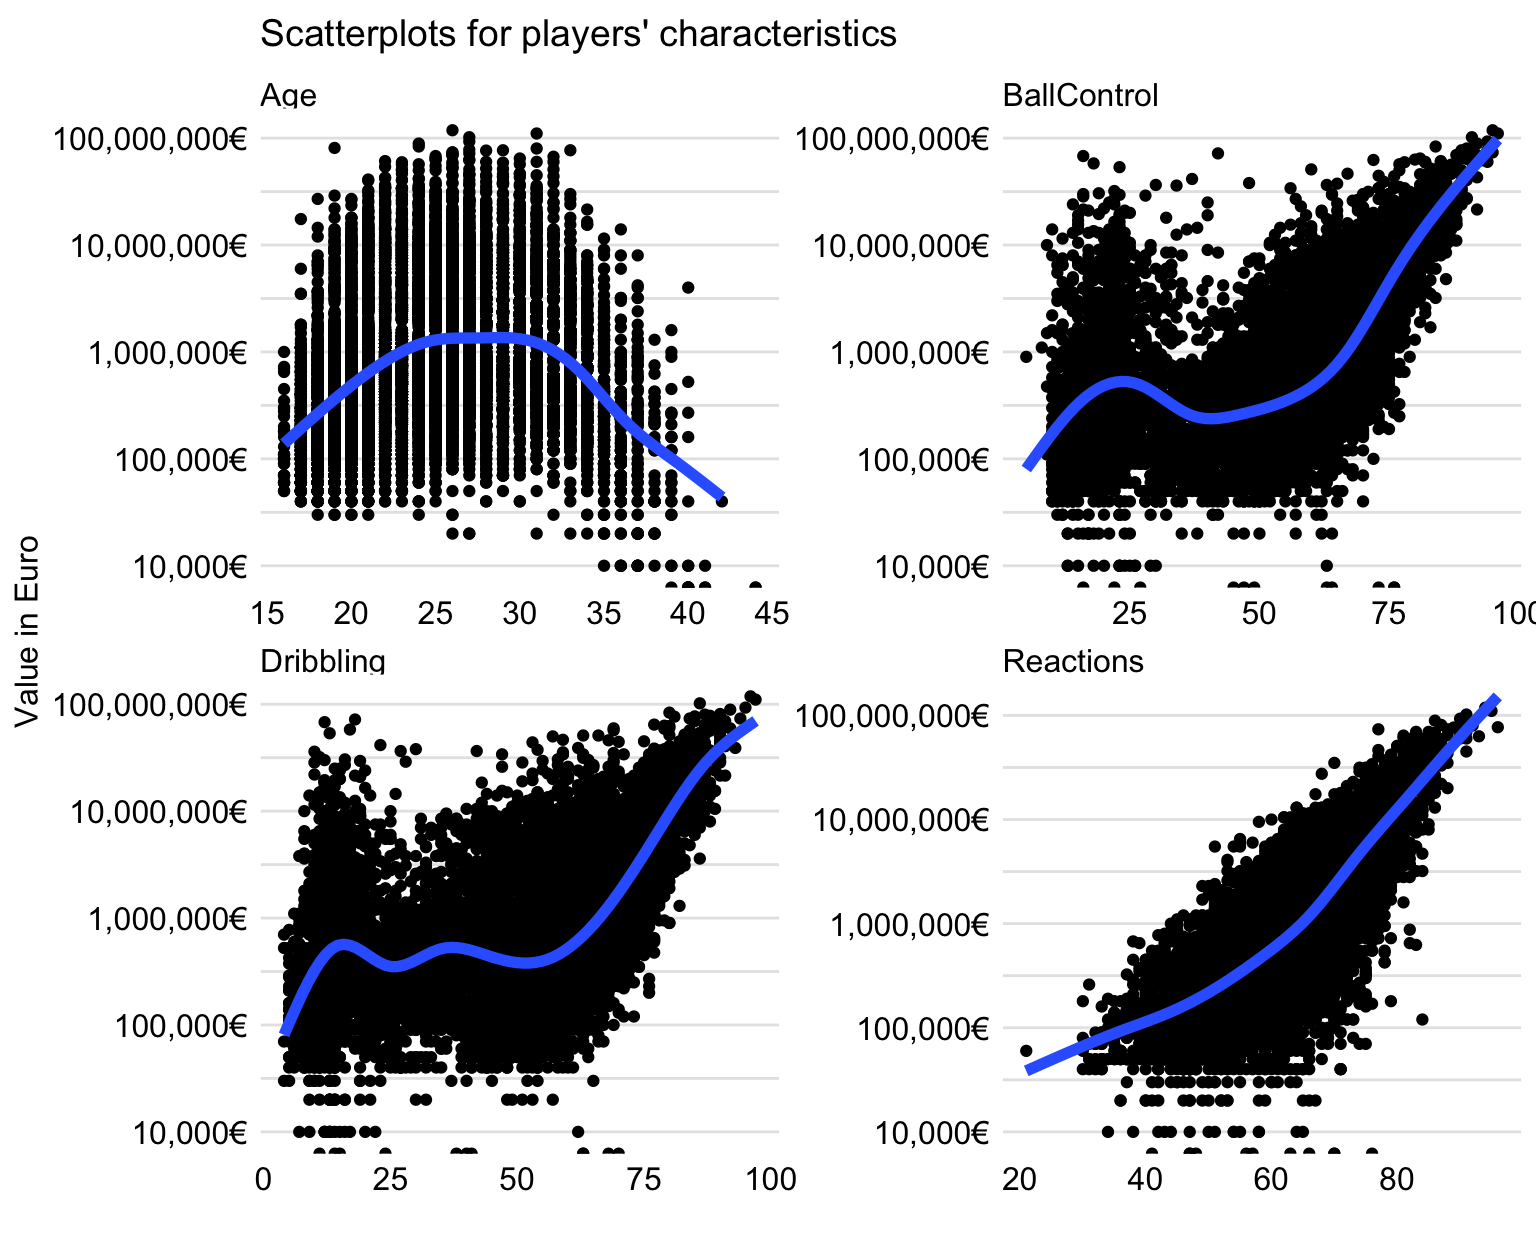 Scatter plots illustrating the relationship between the (logarithmically-transformed) player’s value and selected characteristics.